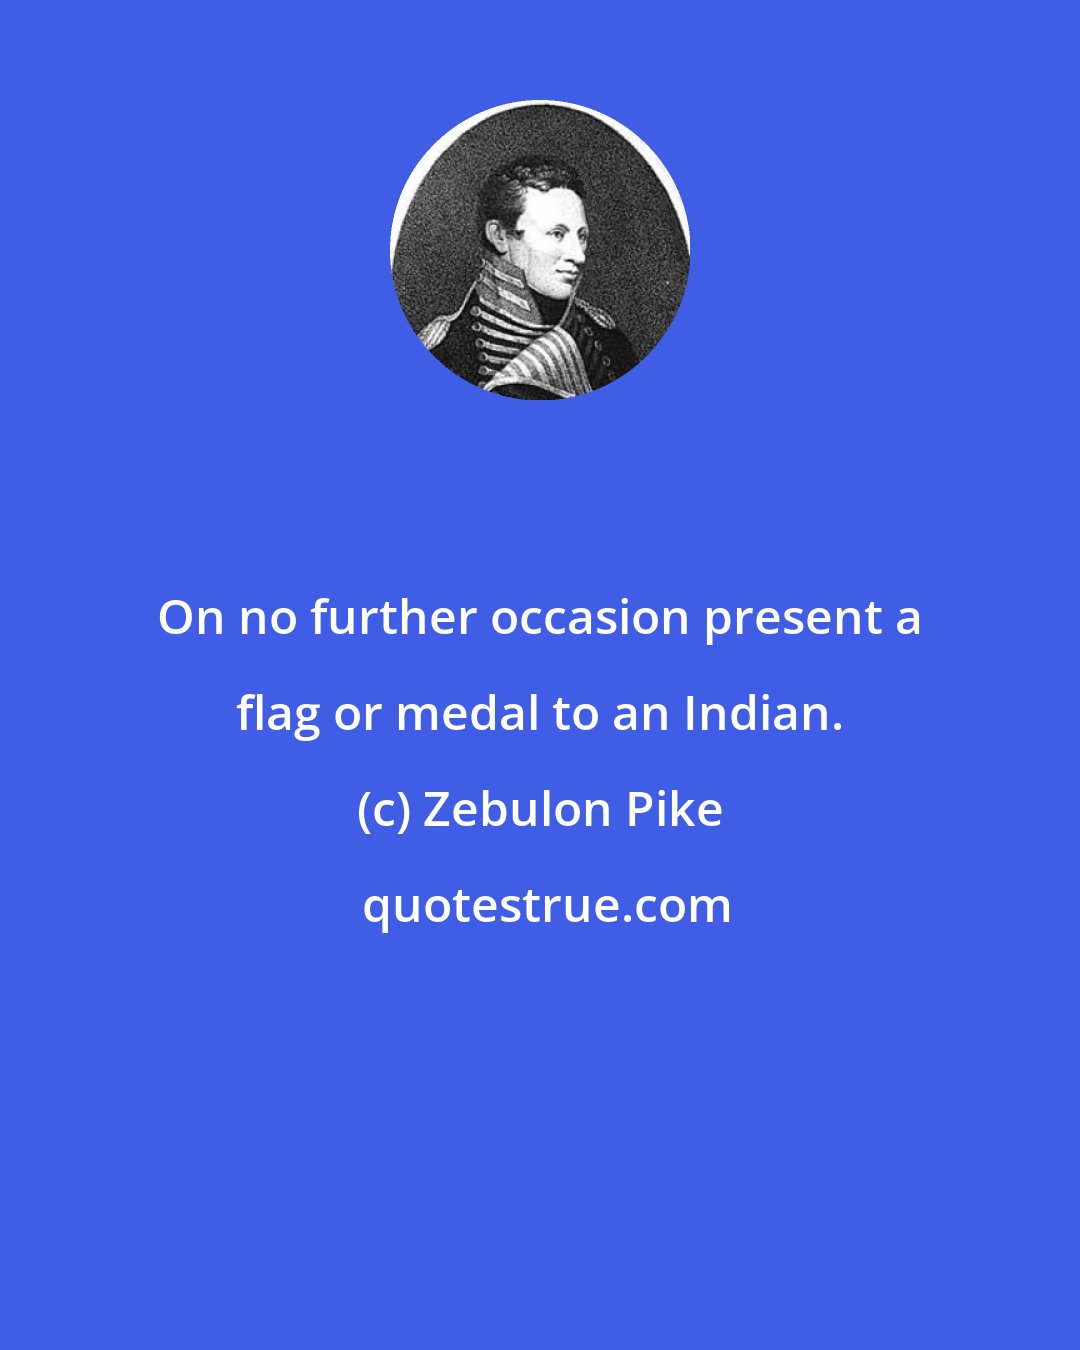 Zebulon Pike: On no further occasion present a flag or medal to an Indian.